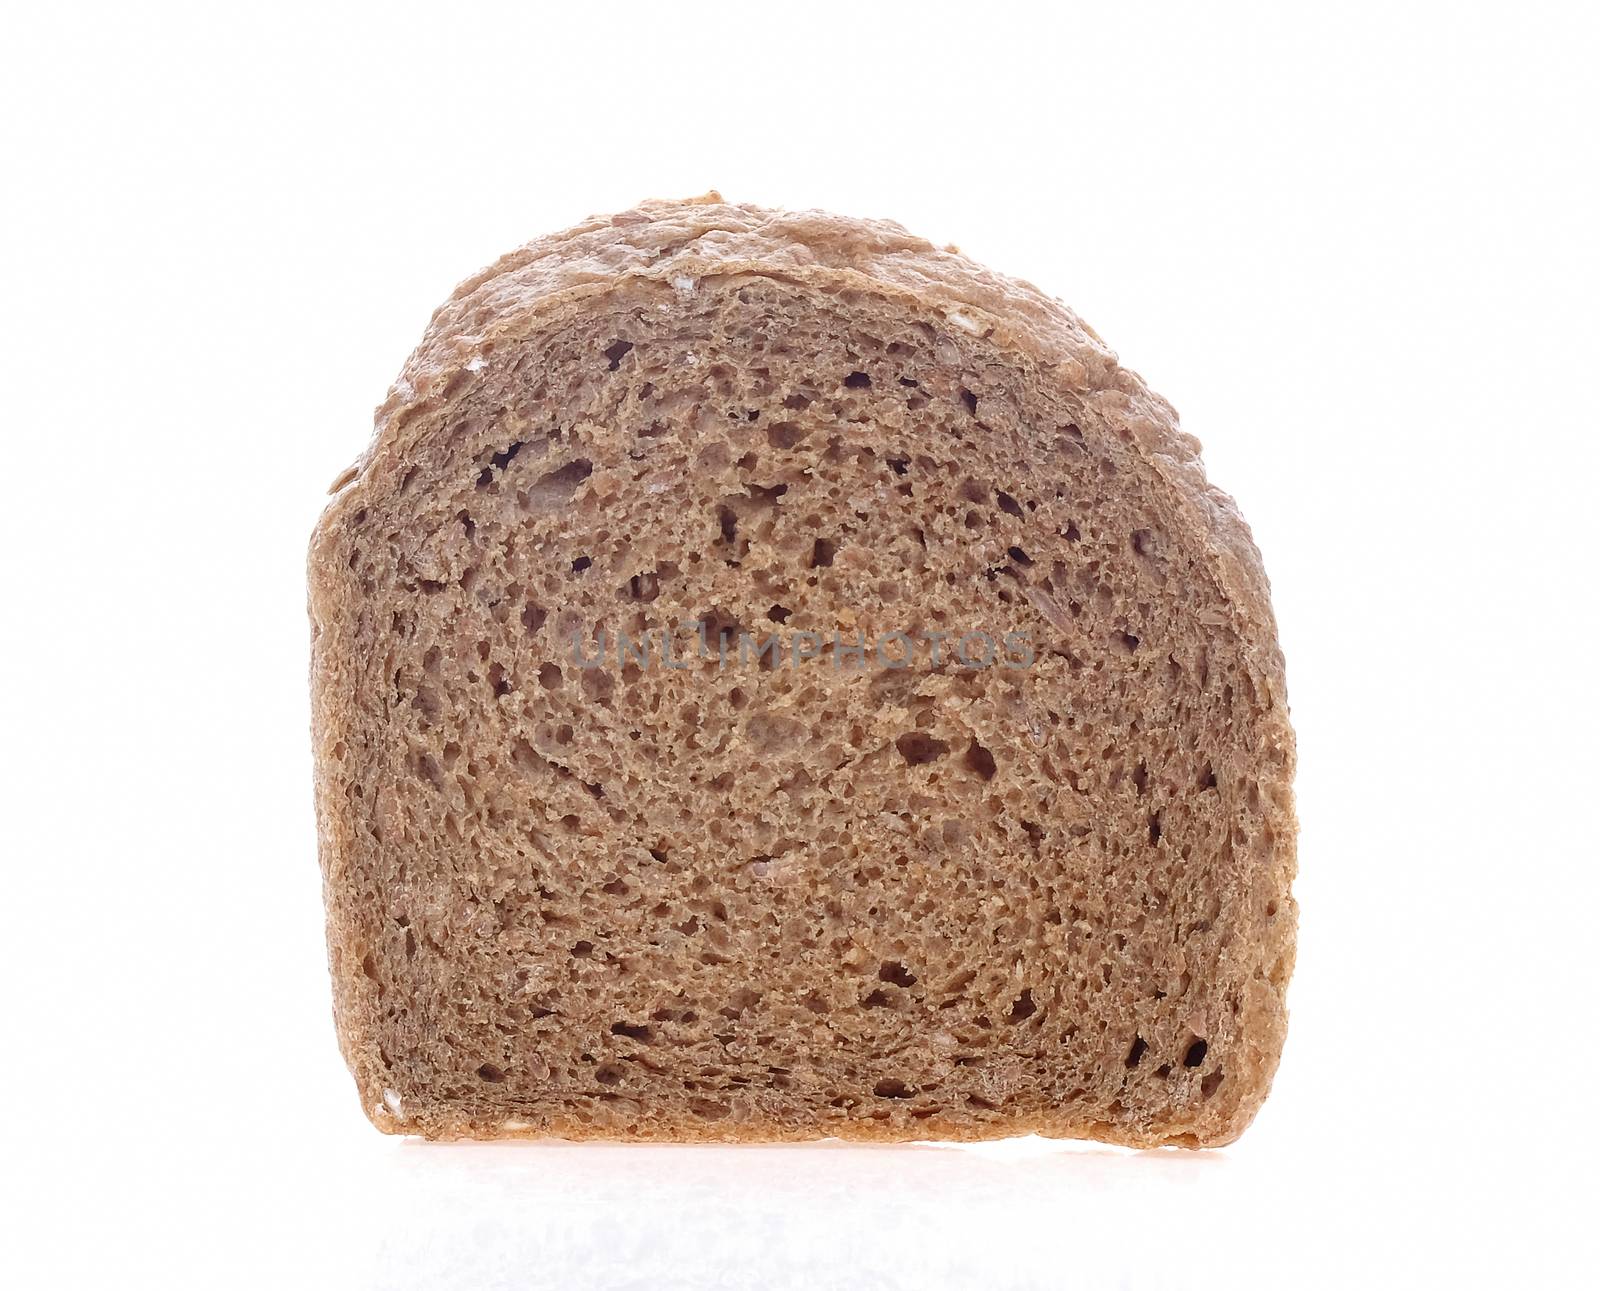 Chocolate bread sliced on white background.